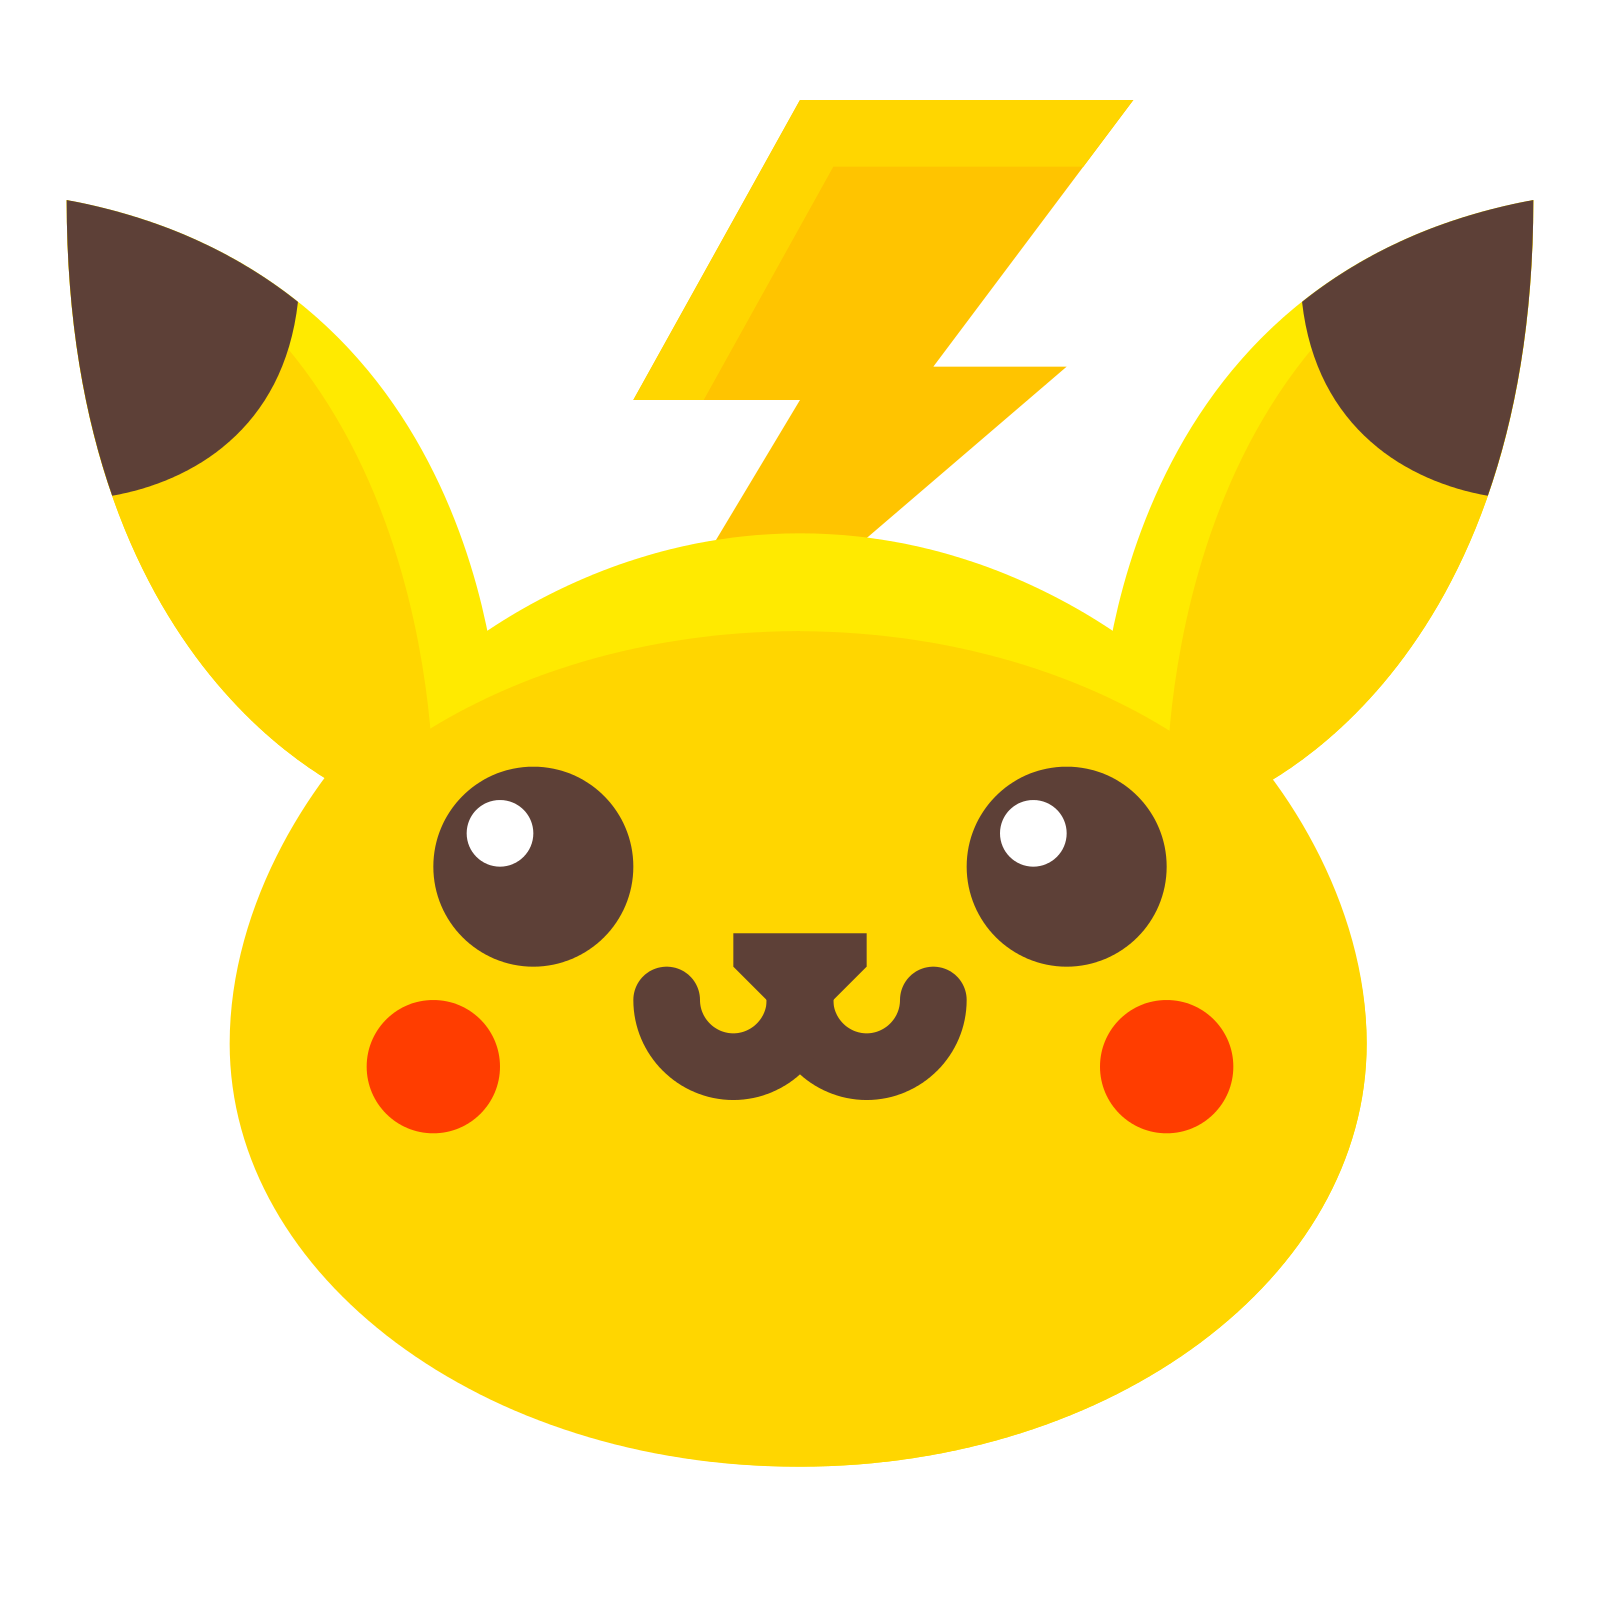 Download Pikachu clipart png icon, Pikachu png icon Transparent ...